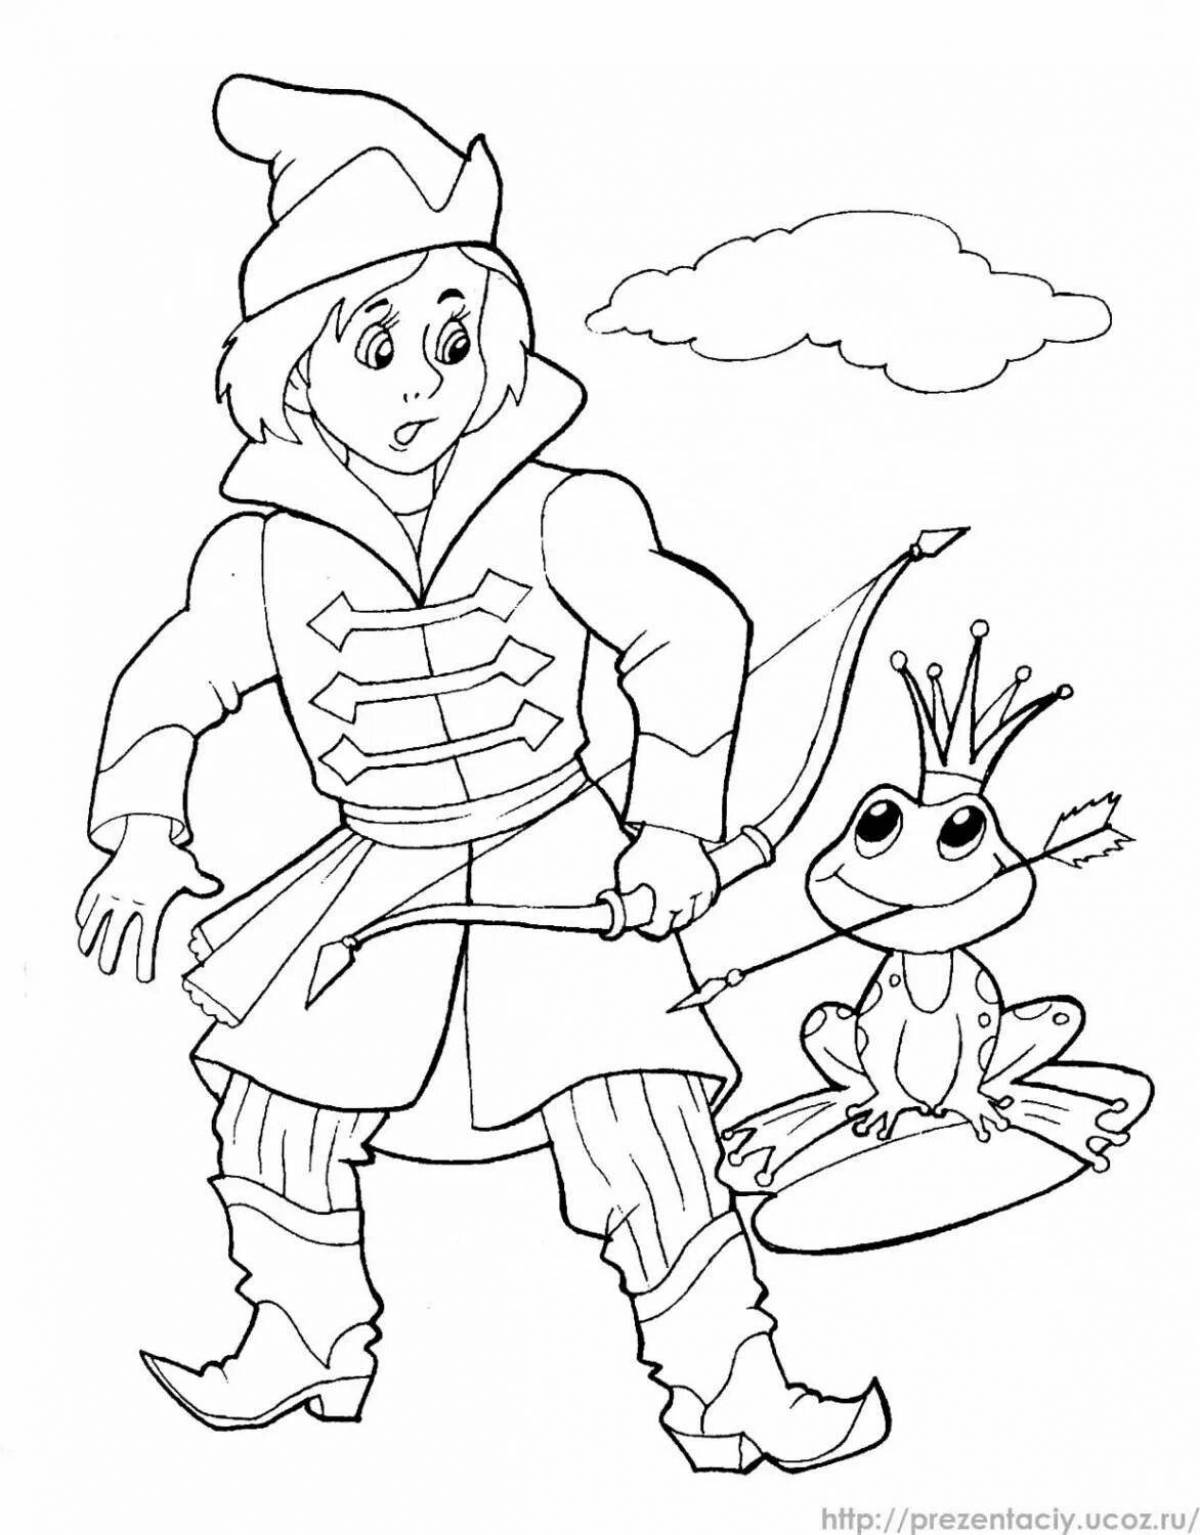 Amazing frog princess coloring page for kids